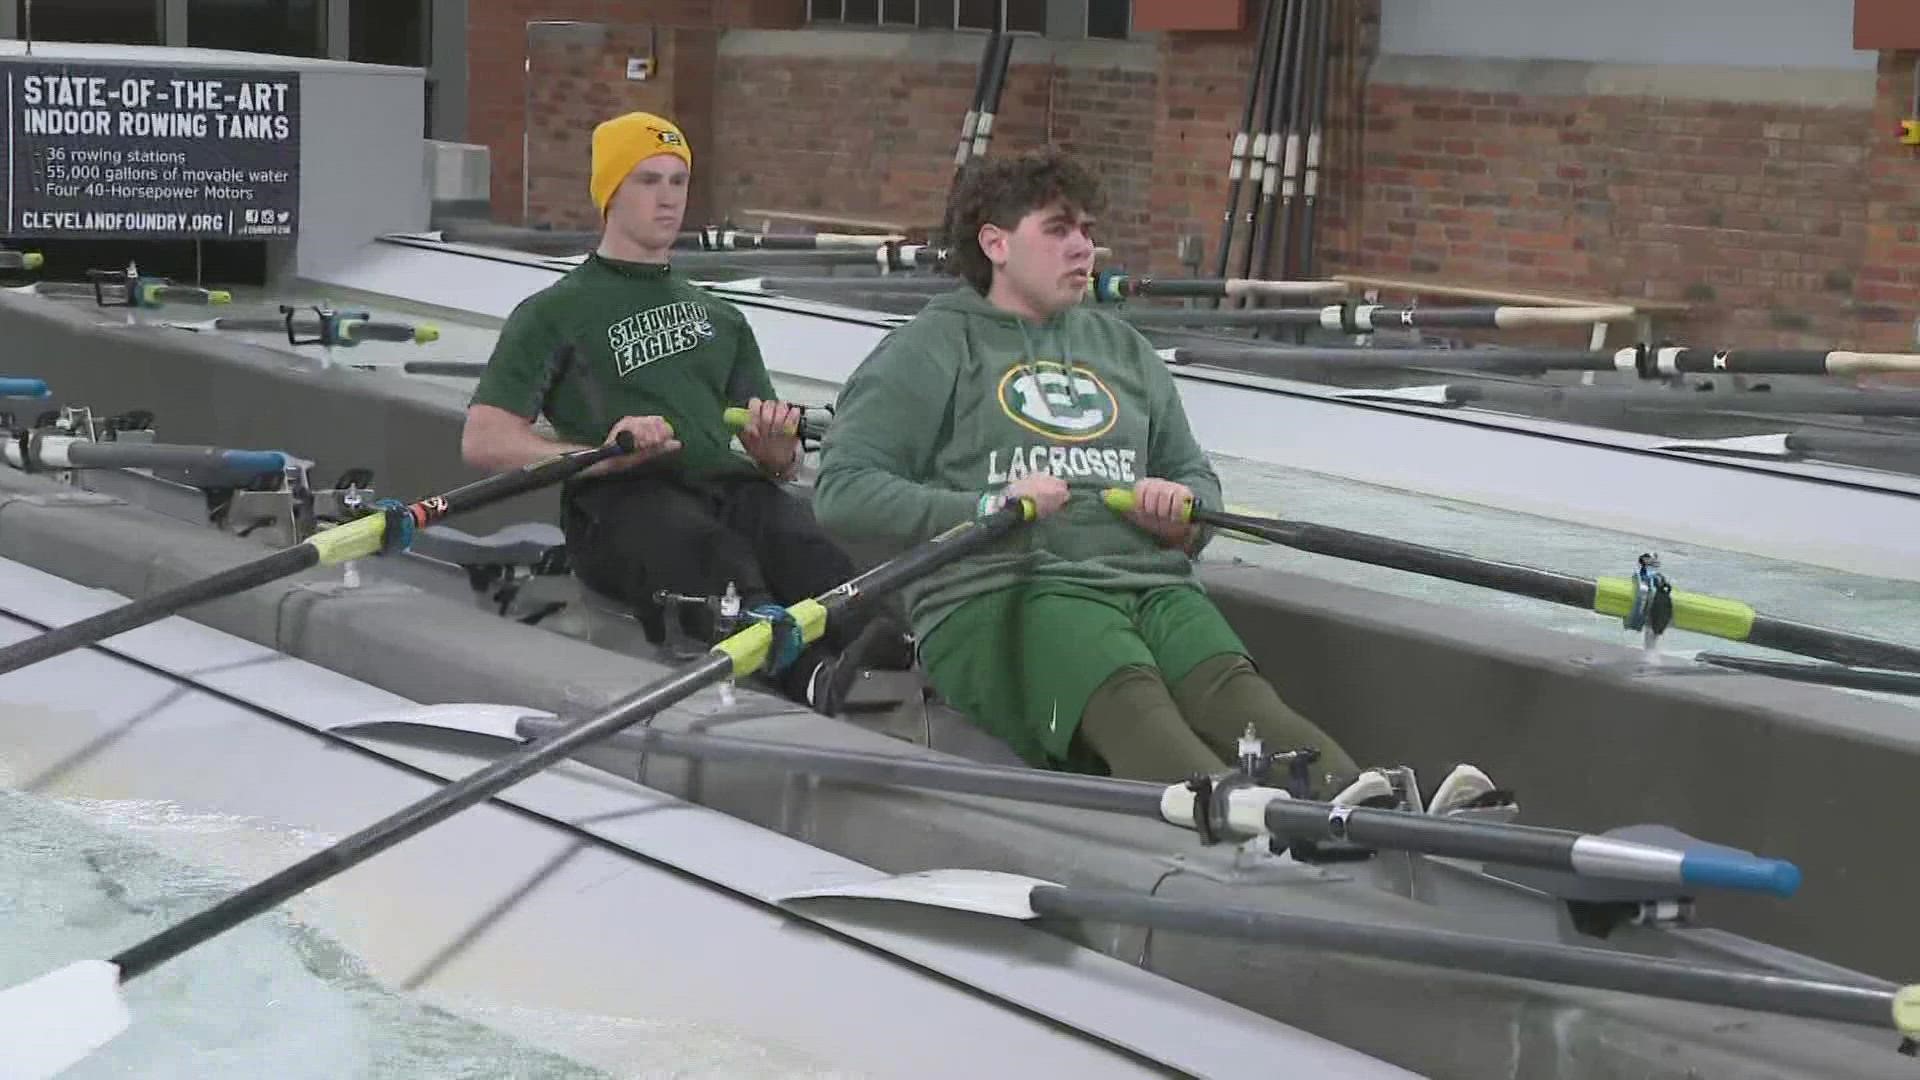 The Foundry has indoor rowing tanks right here in Cleveland.